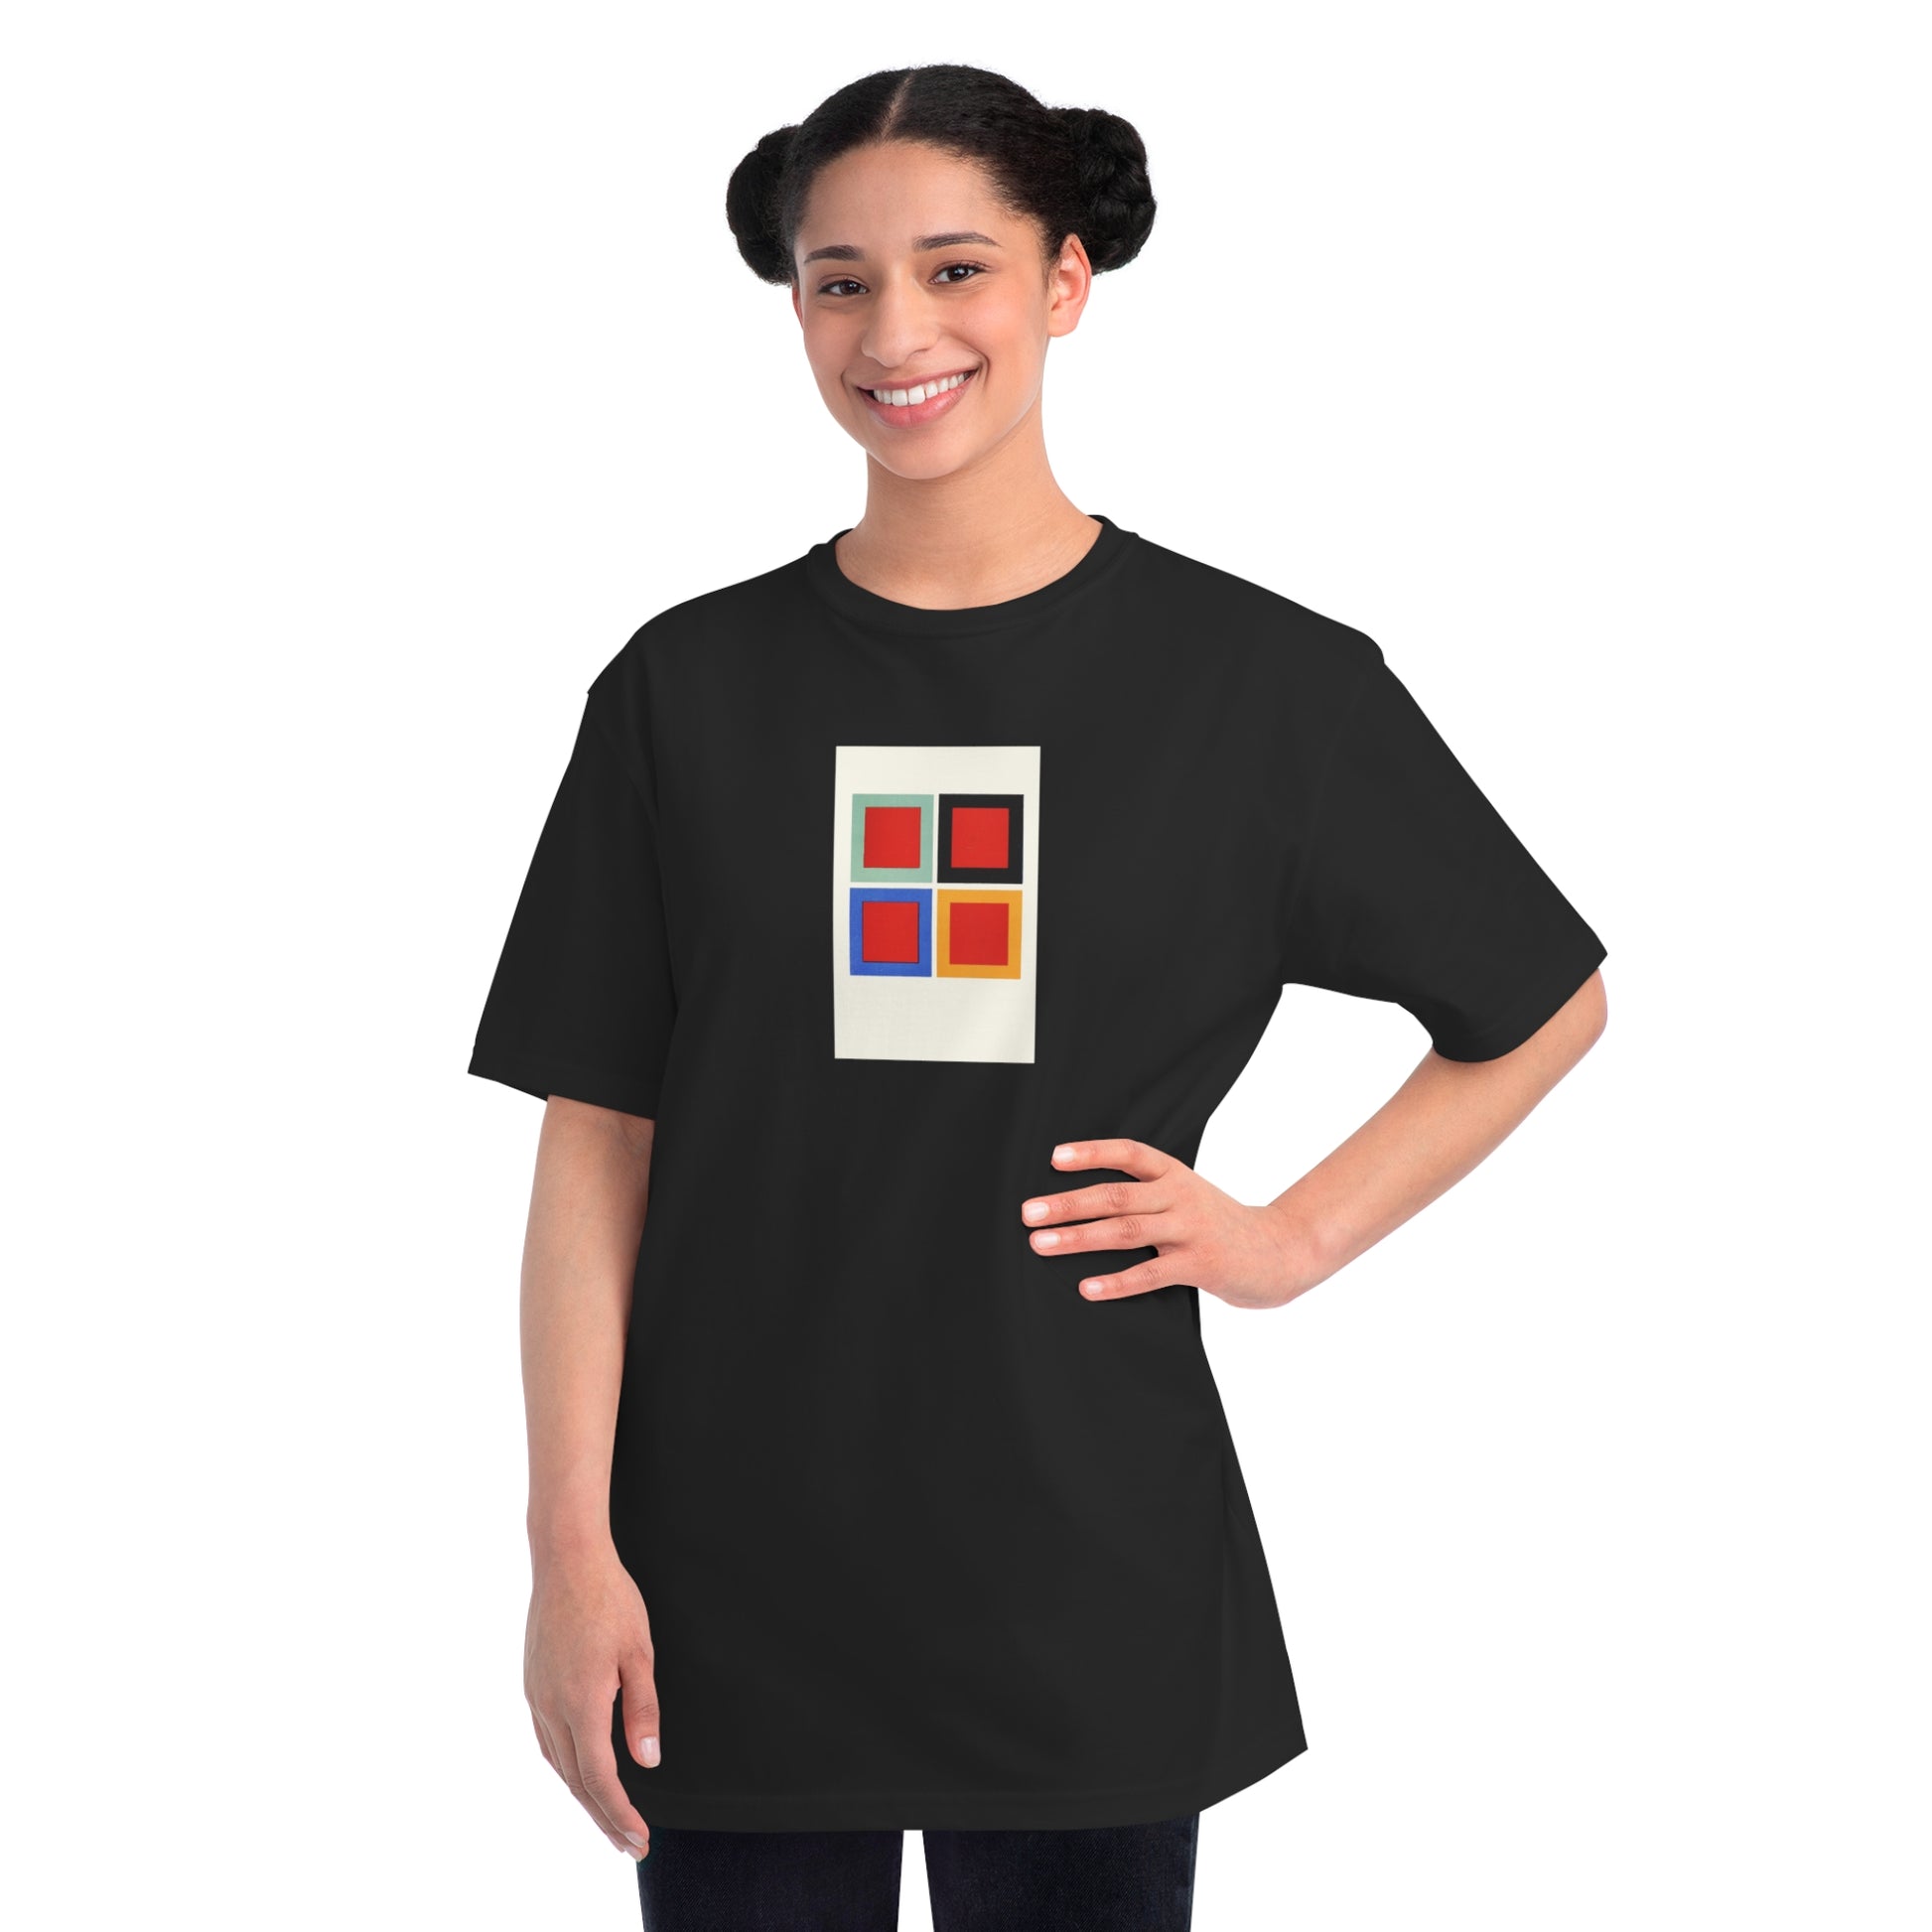 a woman wearing a black t - shirt with a colorful square on it